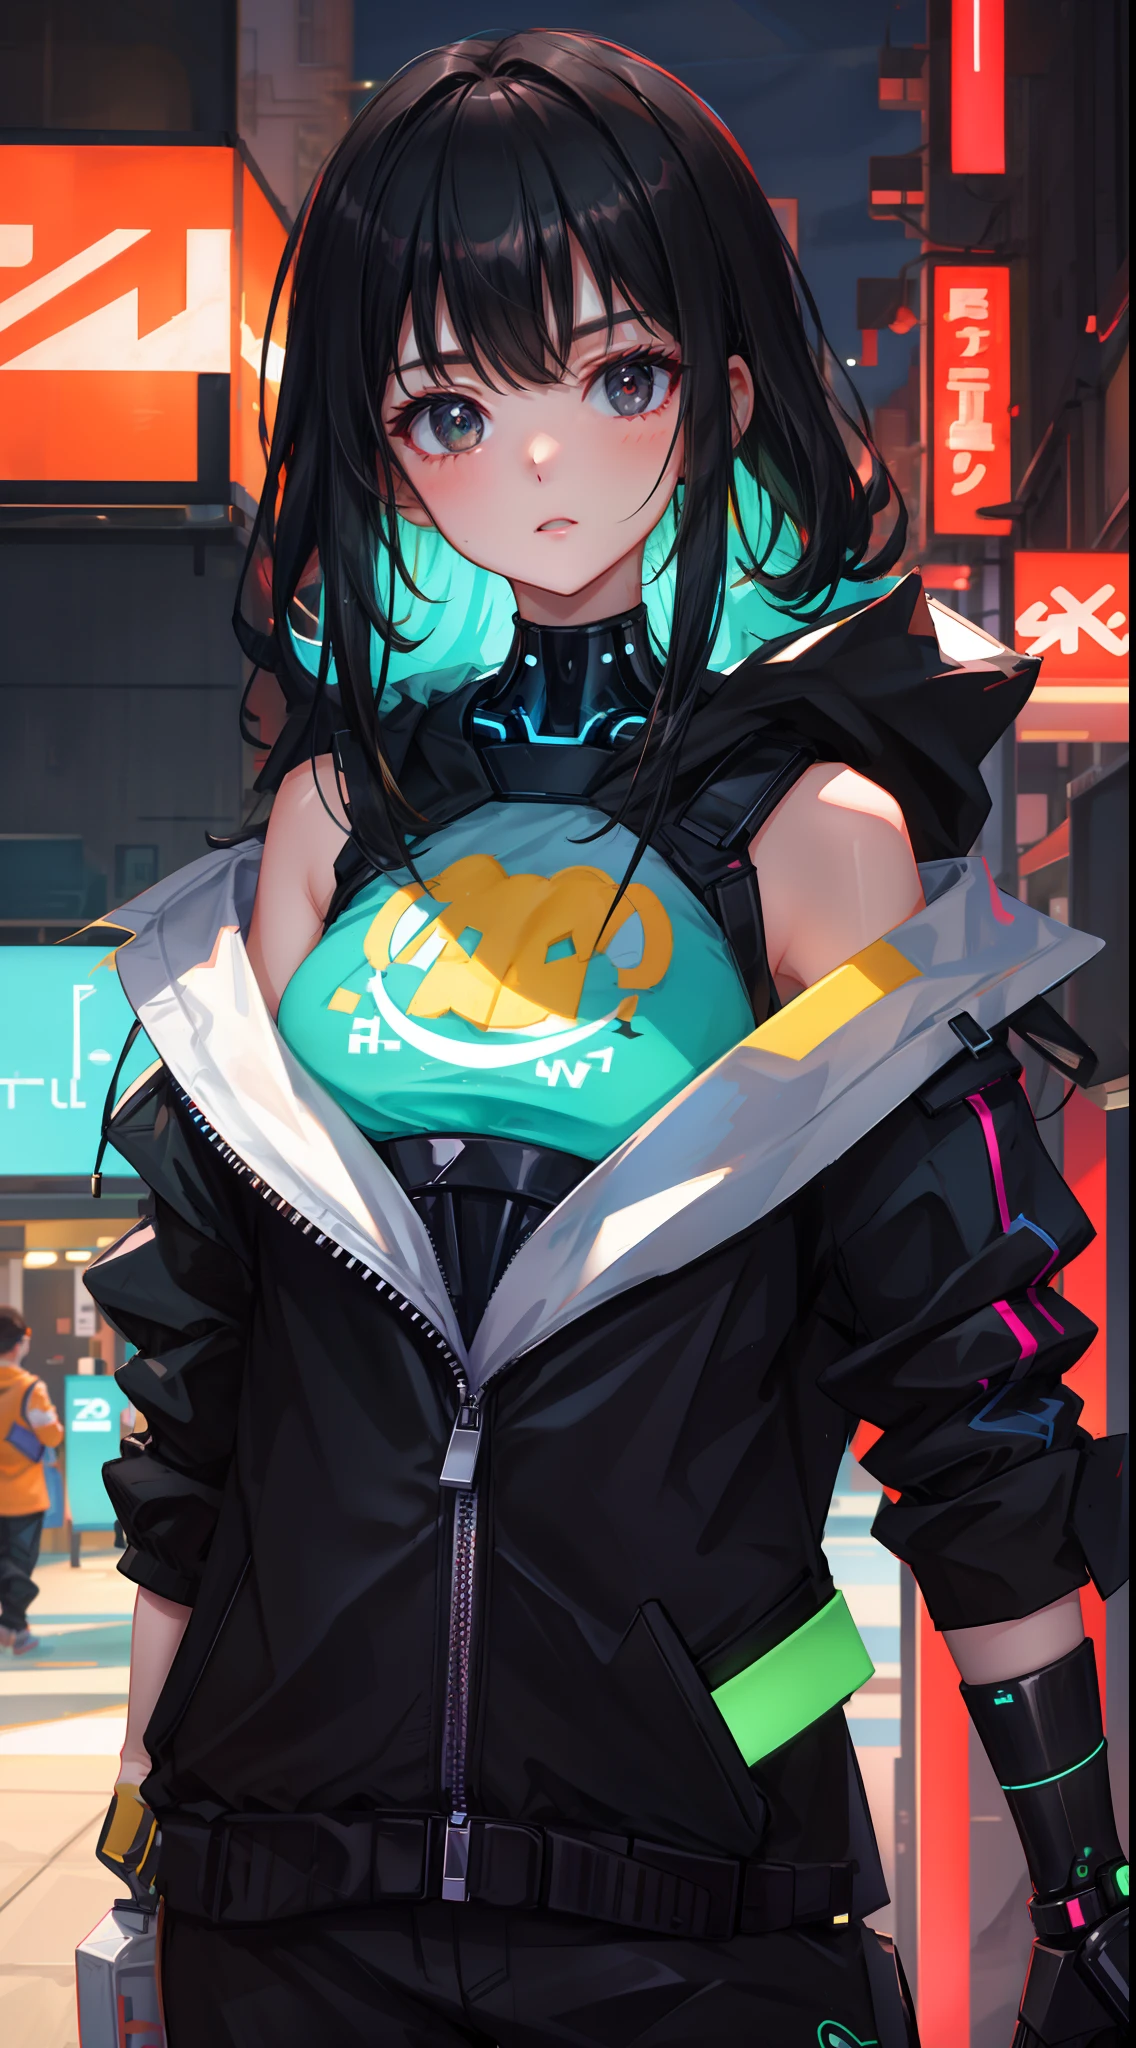 1 girl, upper body, single focus, futuristic beauty, cyberpunk attire, sizzling demeanor, (summer nights in the cybercity: 1.4), (cybernetic heatwave: 1.3), futuristic features, scorching aura, [depth of field, ambient lighting, steamy streets foreground, cybernetic summer skyline in the background], Cyberpunk Summer, neon nights, futuristic heat, (holographic beach: 1.2), intricate details, enhanced lighting.